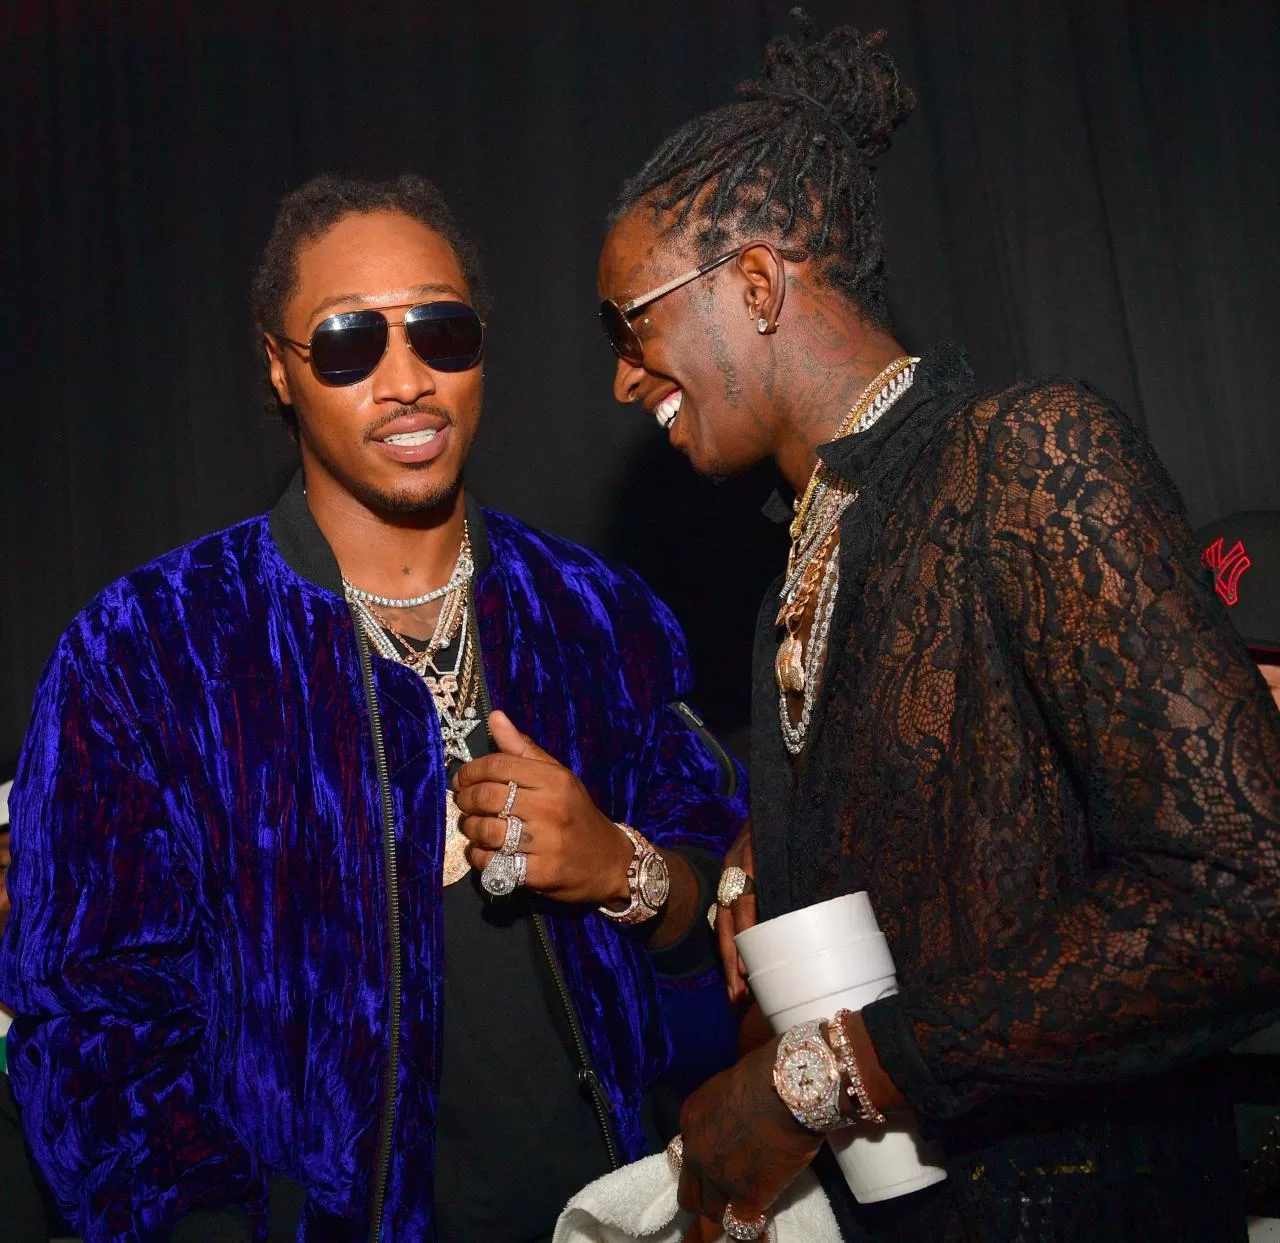 Video: Young Thug - Relationship feat. Future